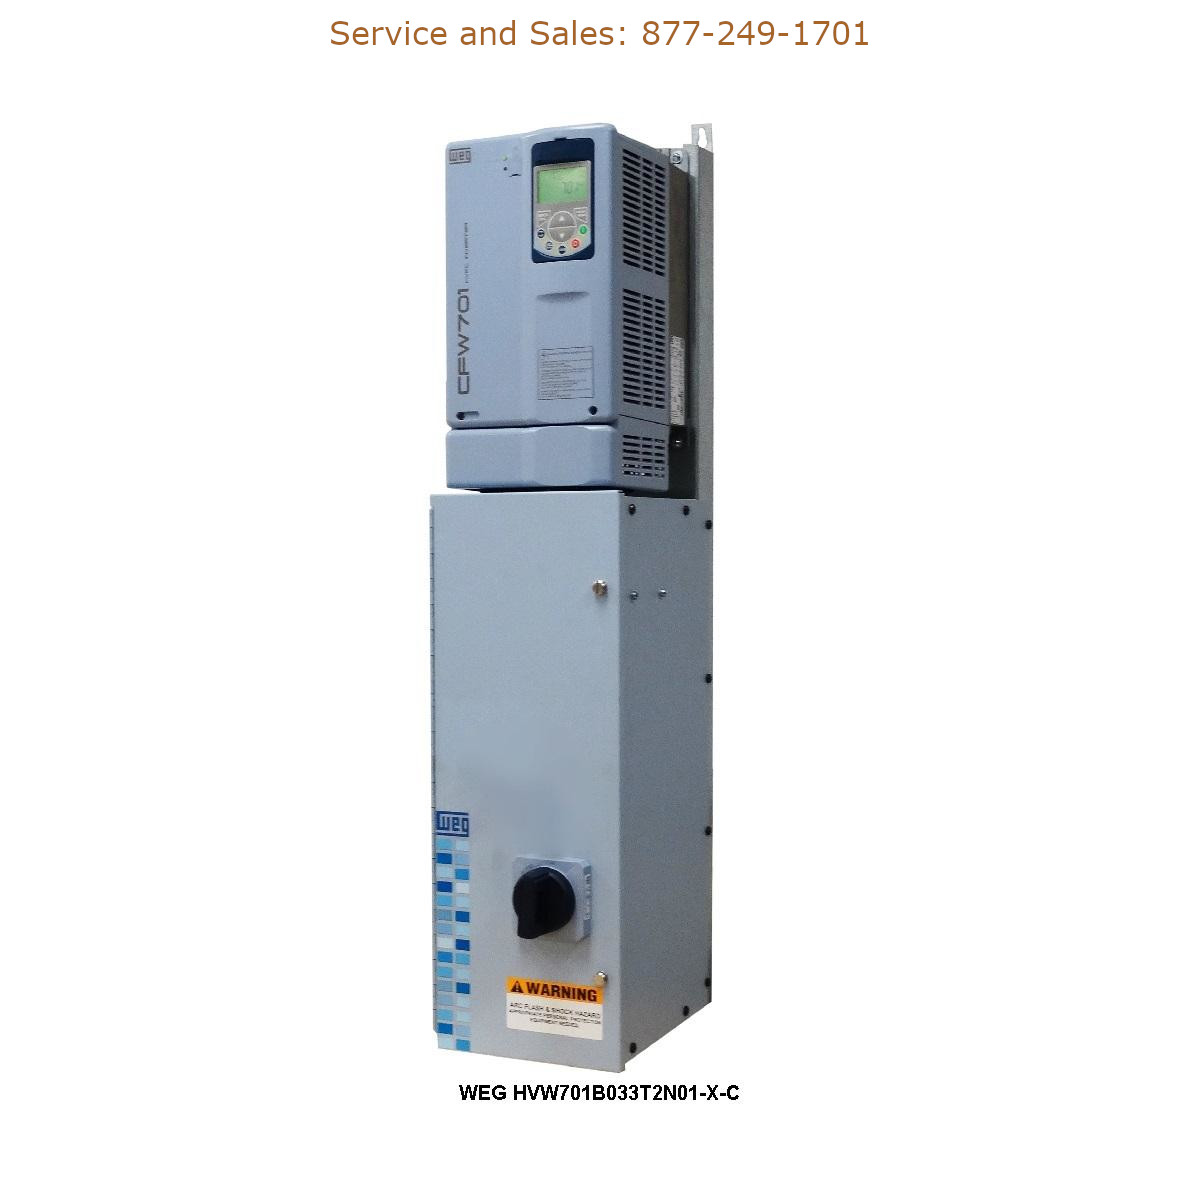 WEG HVW701B033T2N01-X-C WEG Model Number HVW701B033T2N01-X-C WEG Drives, Variable Speed Drives Repair Service, Troubleshooting, Replacement Parts https://gesrepair.com/wp-content/uploads/2022/WEG/WEG_HVW701B033T2N01-X-C_Drives_Variable_Speed_Drives.jpg